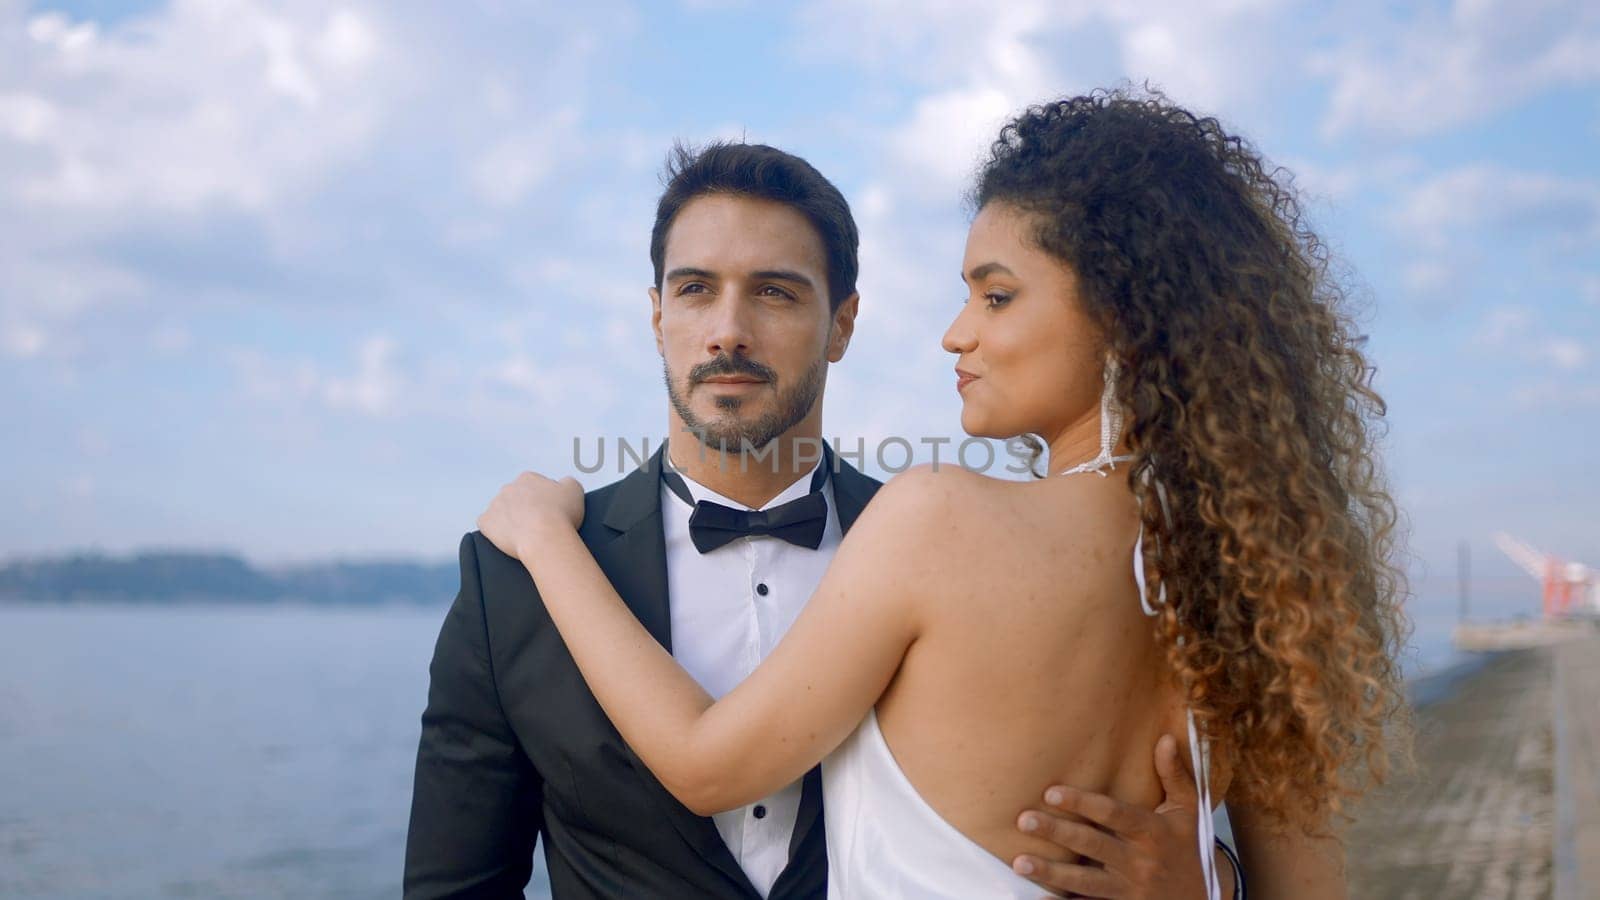 Man in suit with beautiful young woman. Action. Elegant couple in luxurious suits on background of summer landscape. Hot young couple in elegant outfits. Love story.